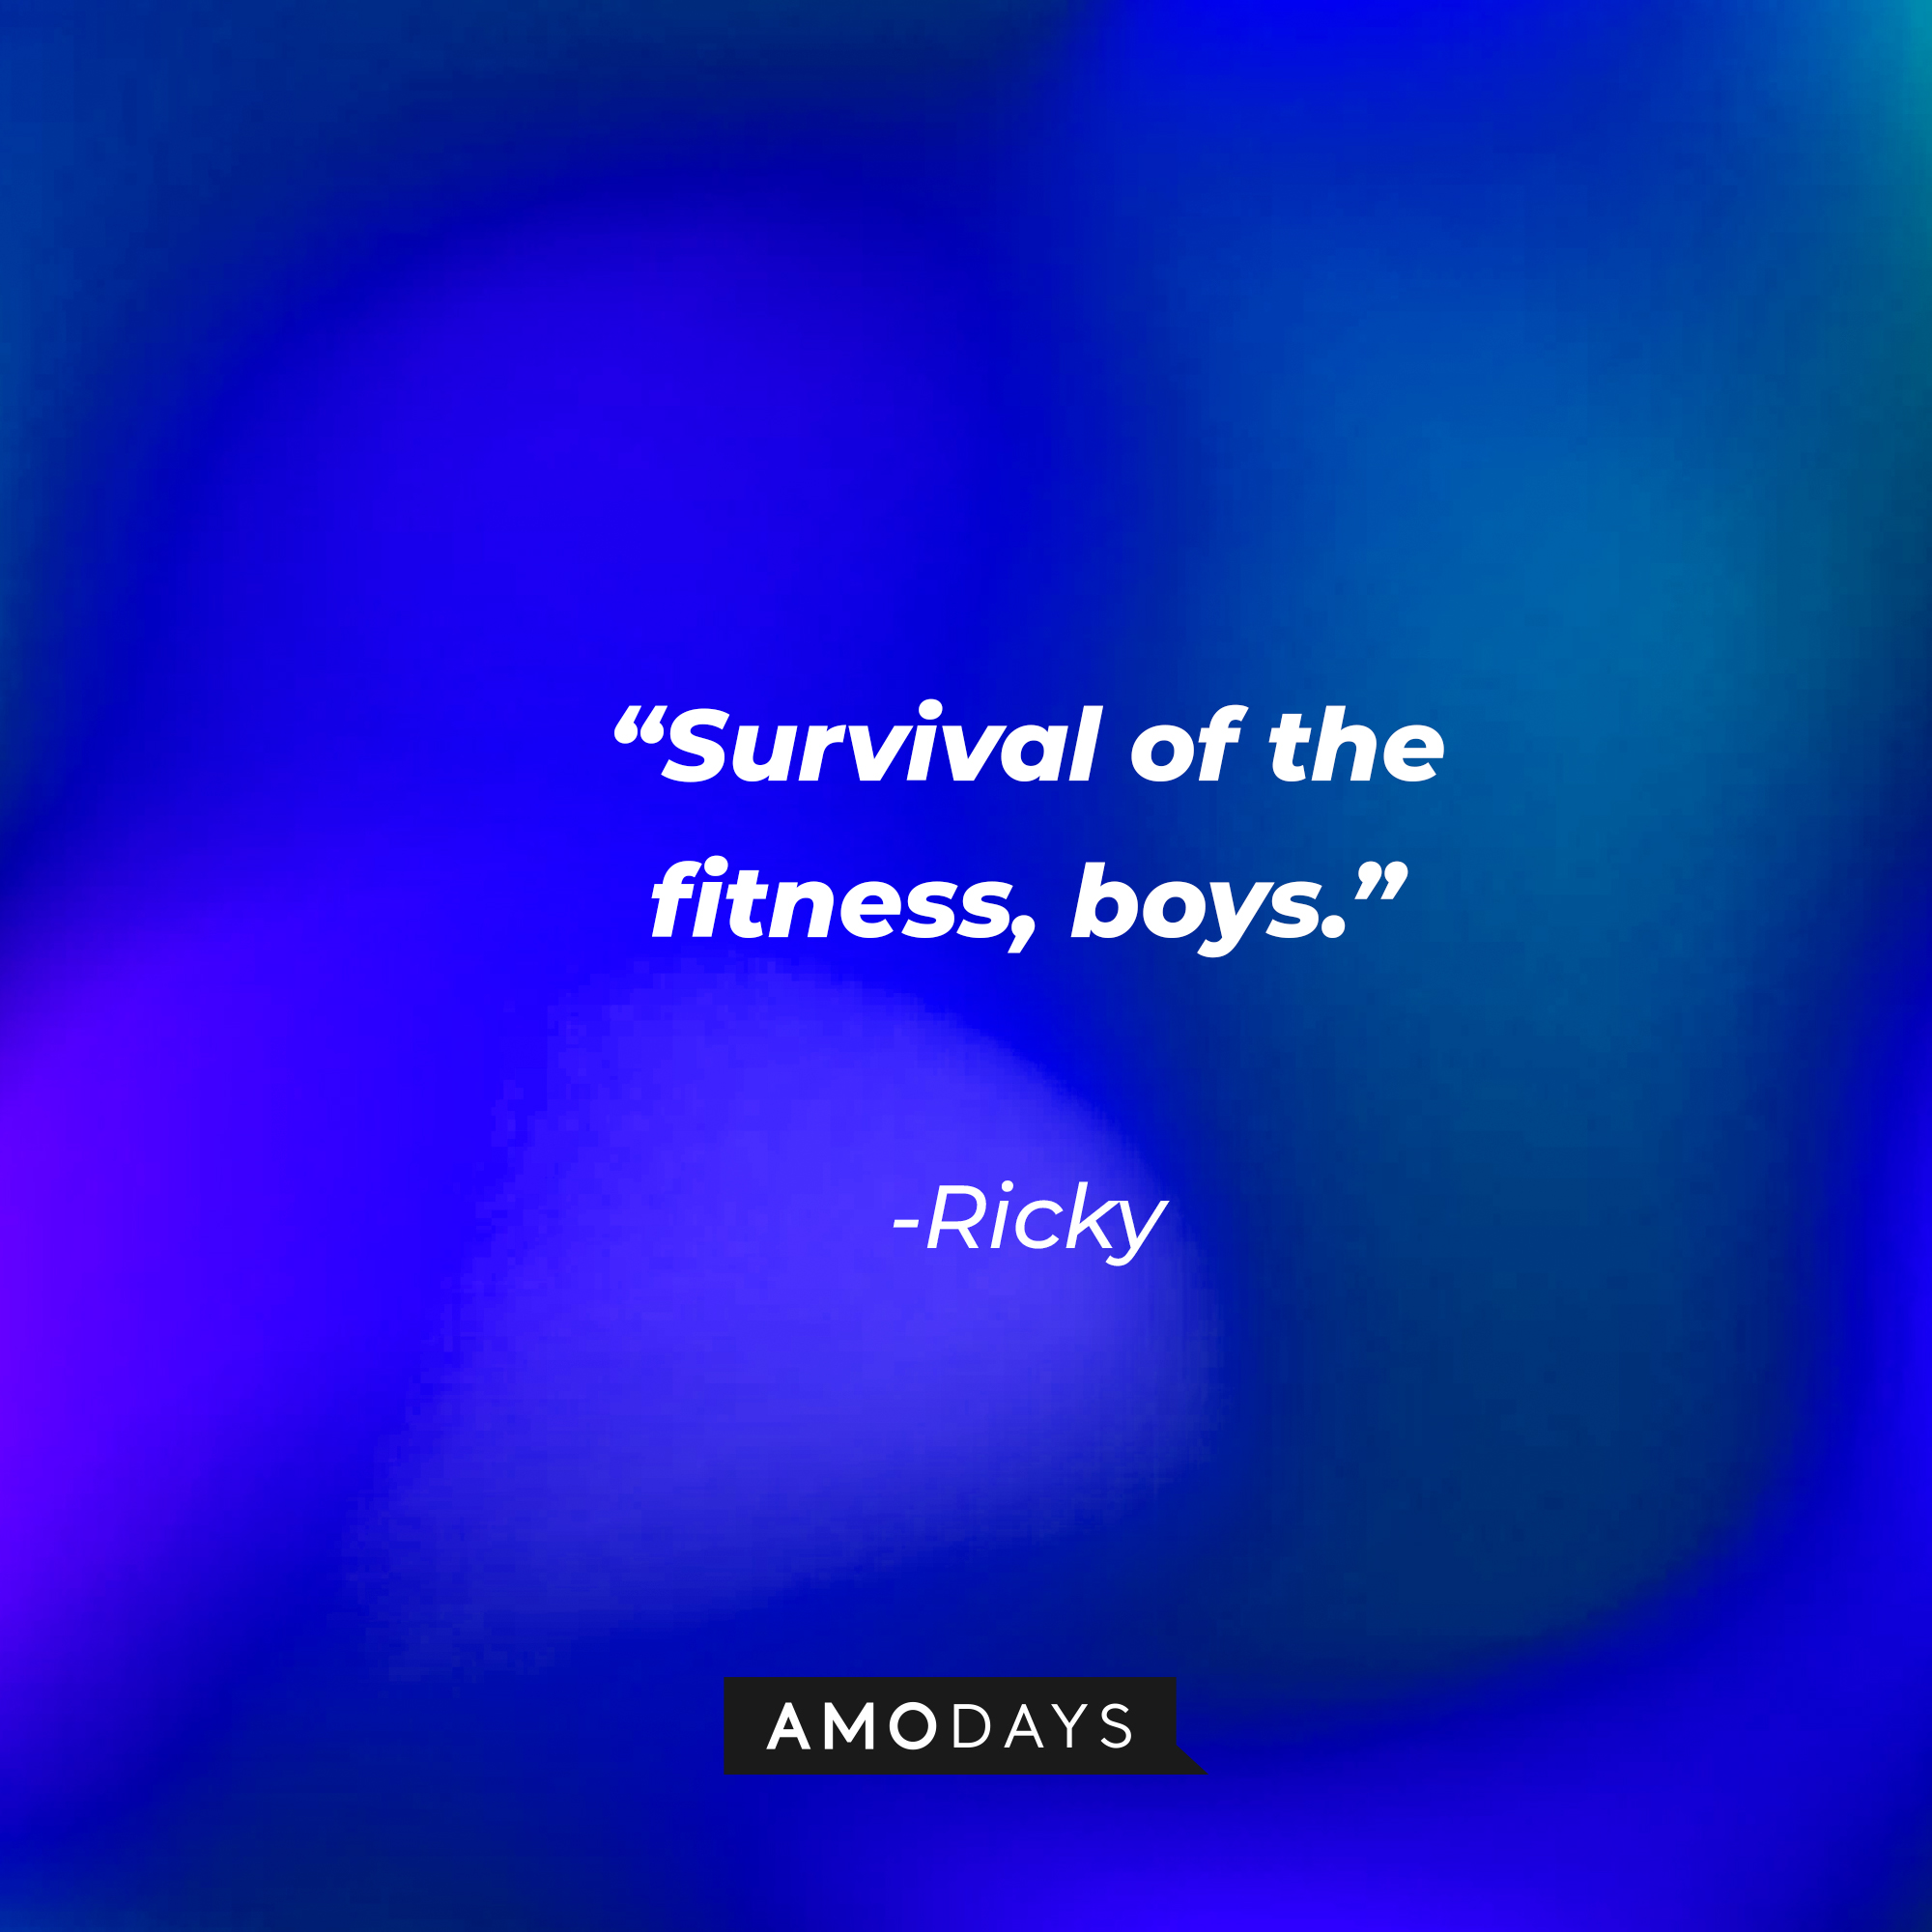 Ricky's quote: “Survival of the fitness, boys.” | Source: Amodays